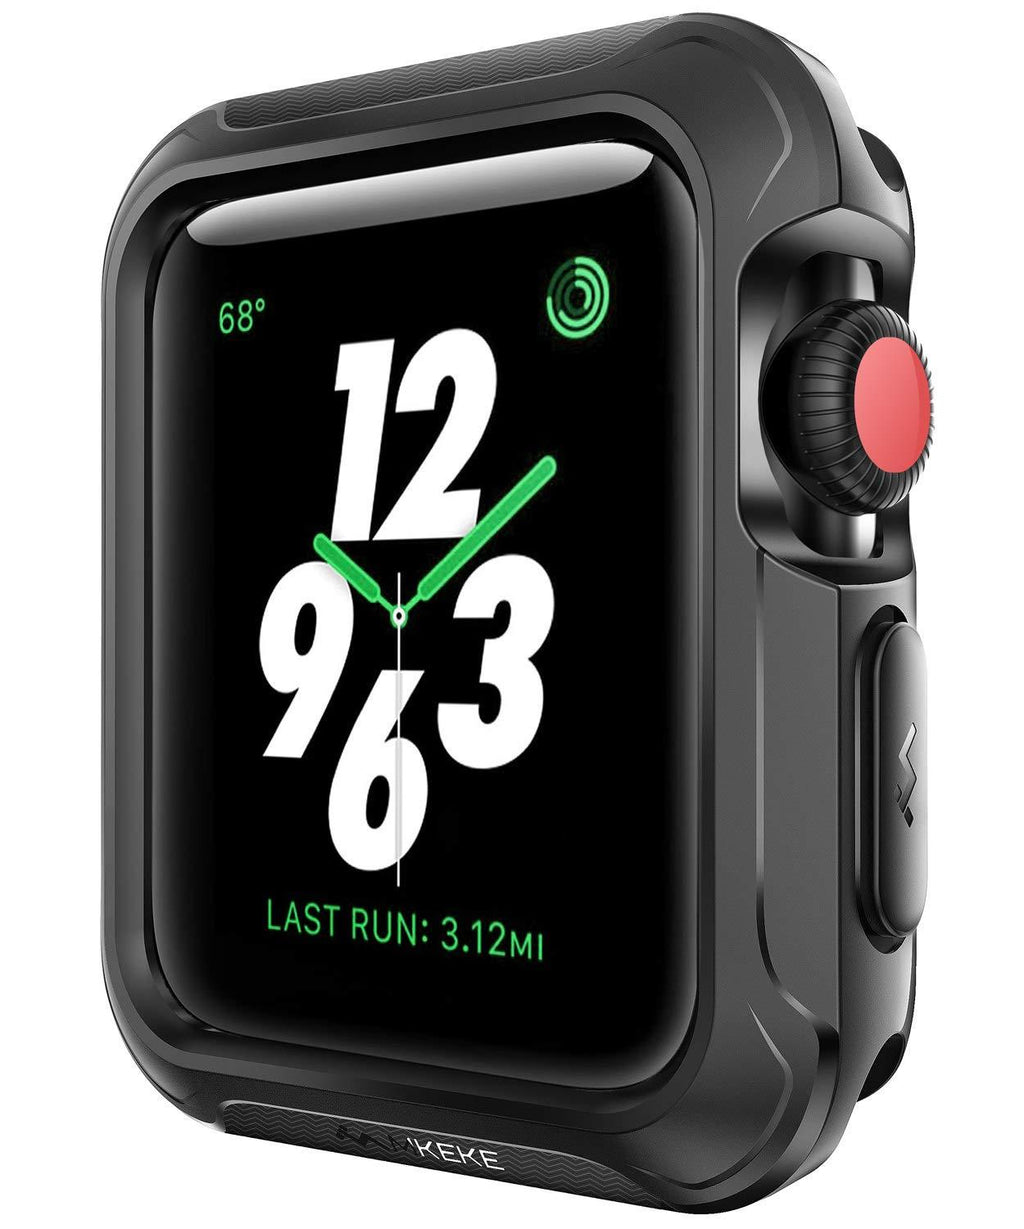 V85 Compatible Apple Watch Case 42mm, Shock-proof and Shatter-resistant Protector Bumper iwatch Case Compatible Apple Watch Series 3, Series 2, Series 1, Nike+,Sport, Edition Black 42 mm